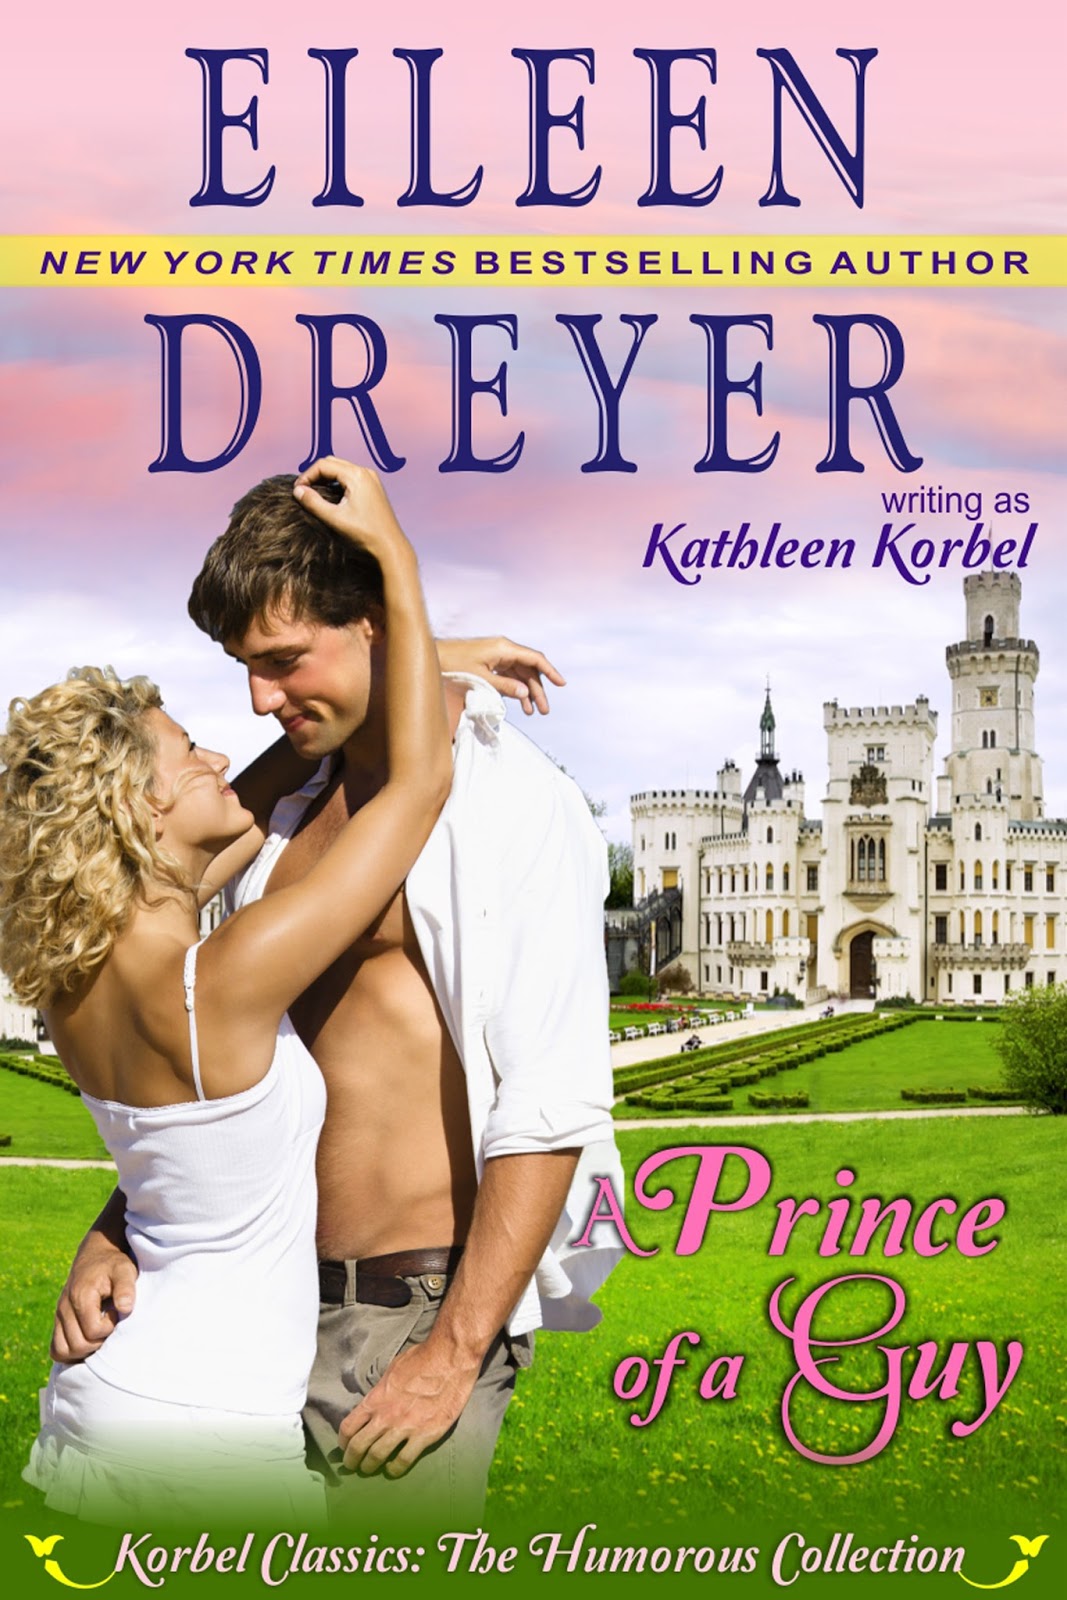 A Prince of a Guy by Eileen Dreyer